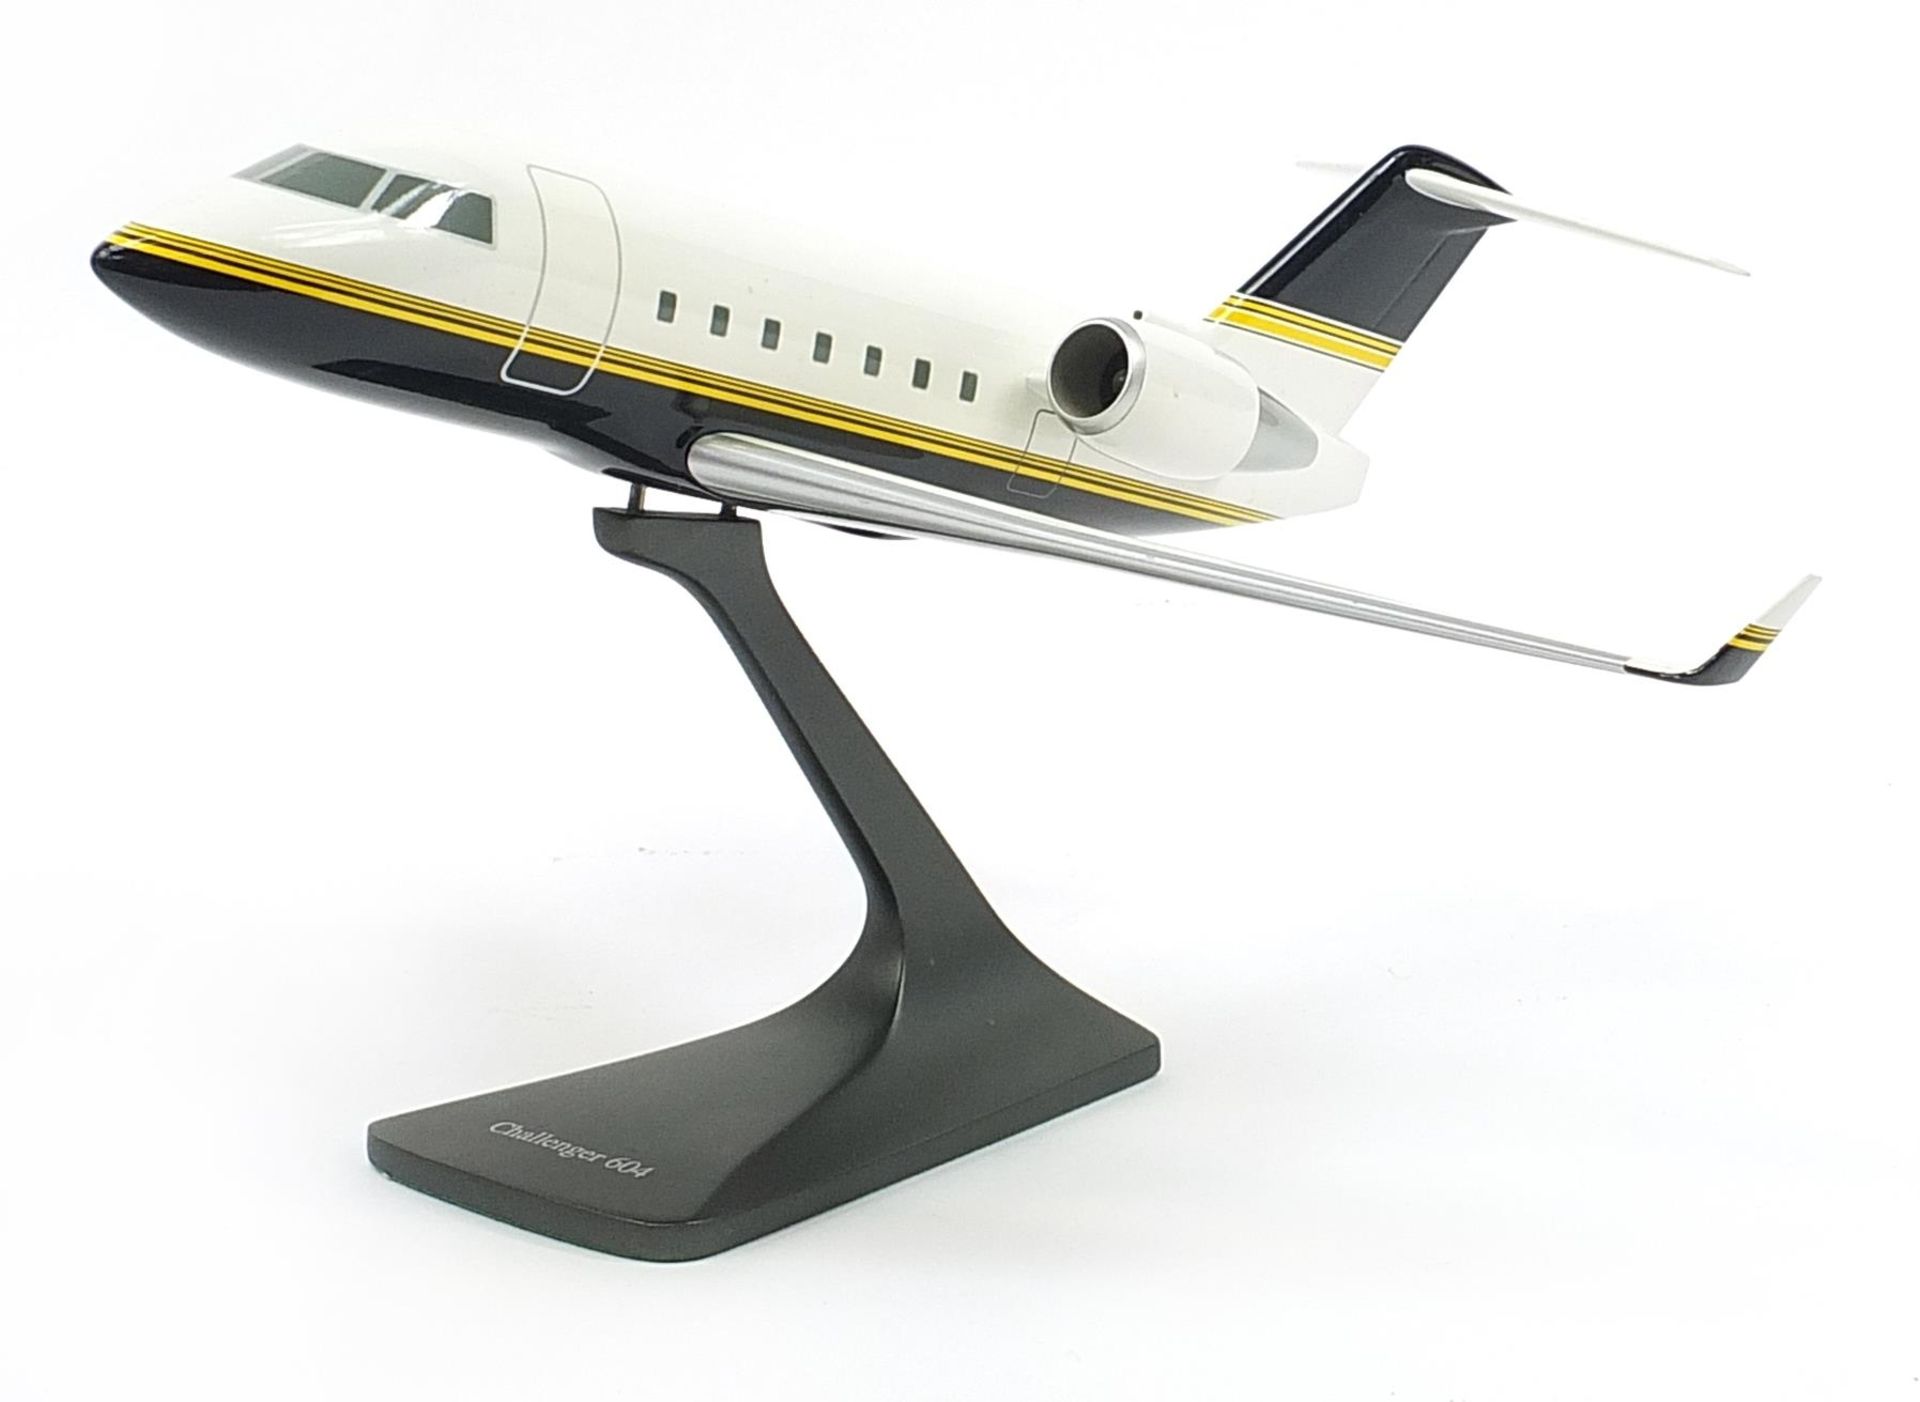 Aviation interest 1/50th scale model of Bombardier Challenger 604 Private Business Jet by Space